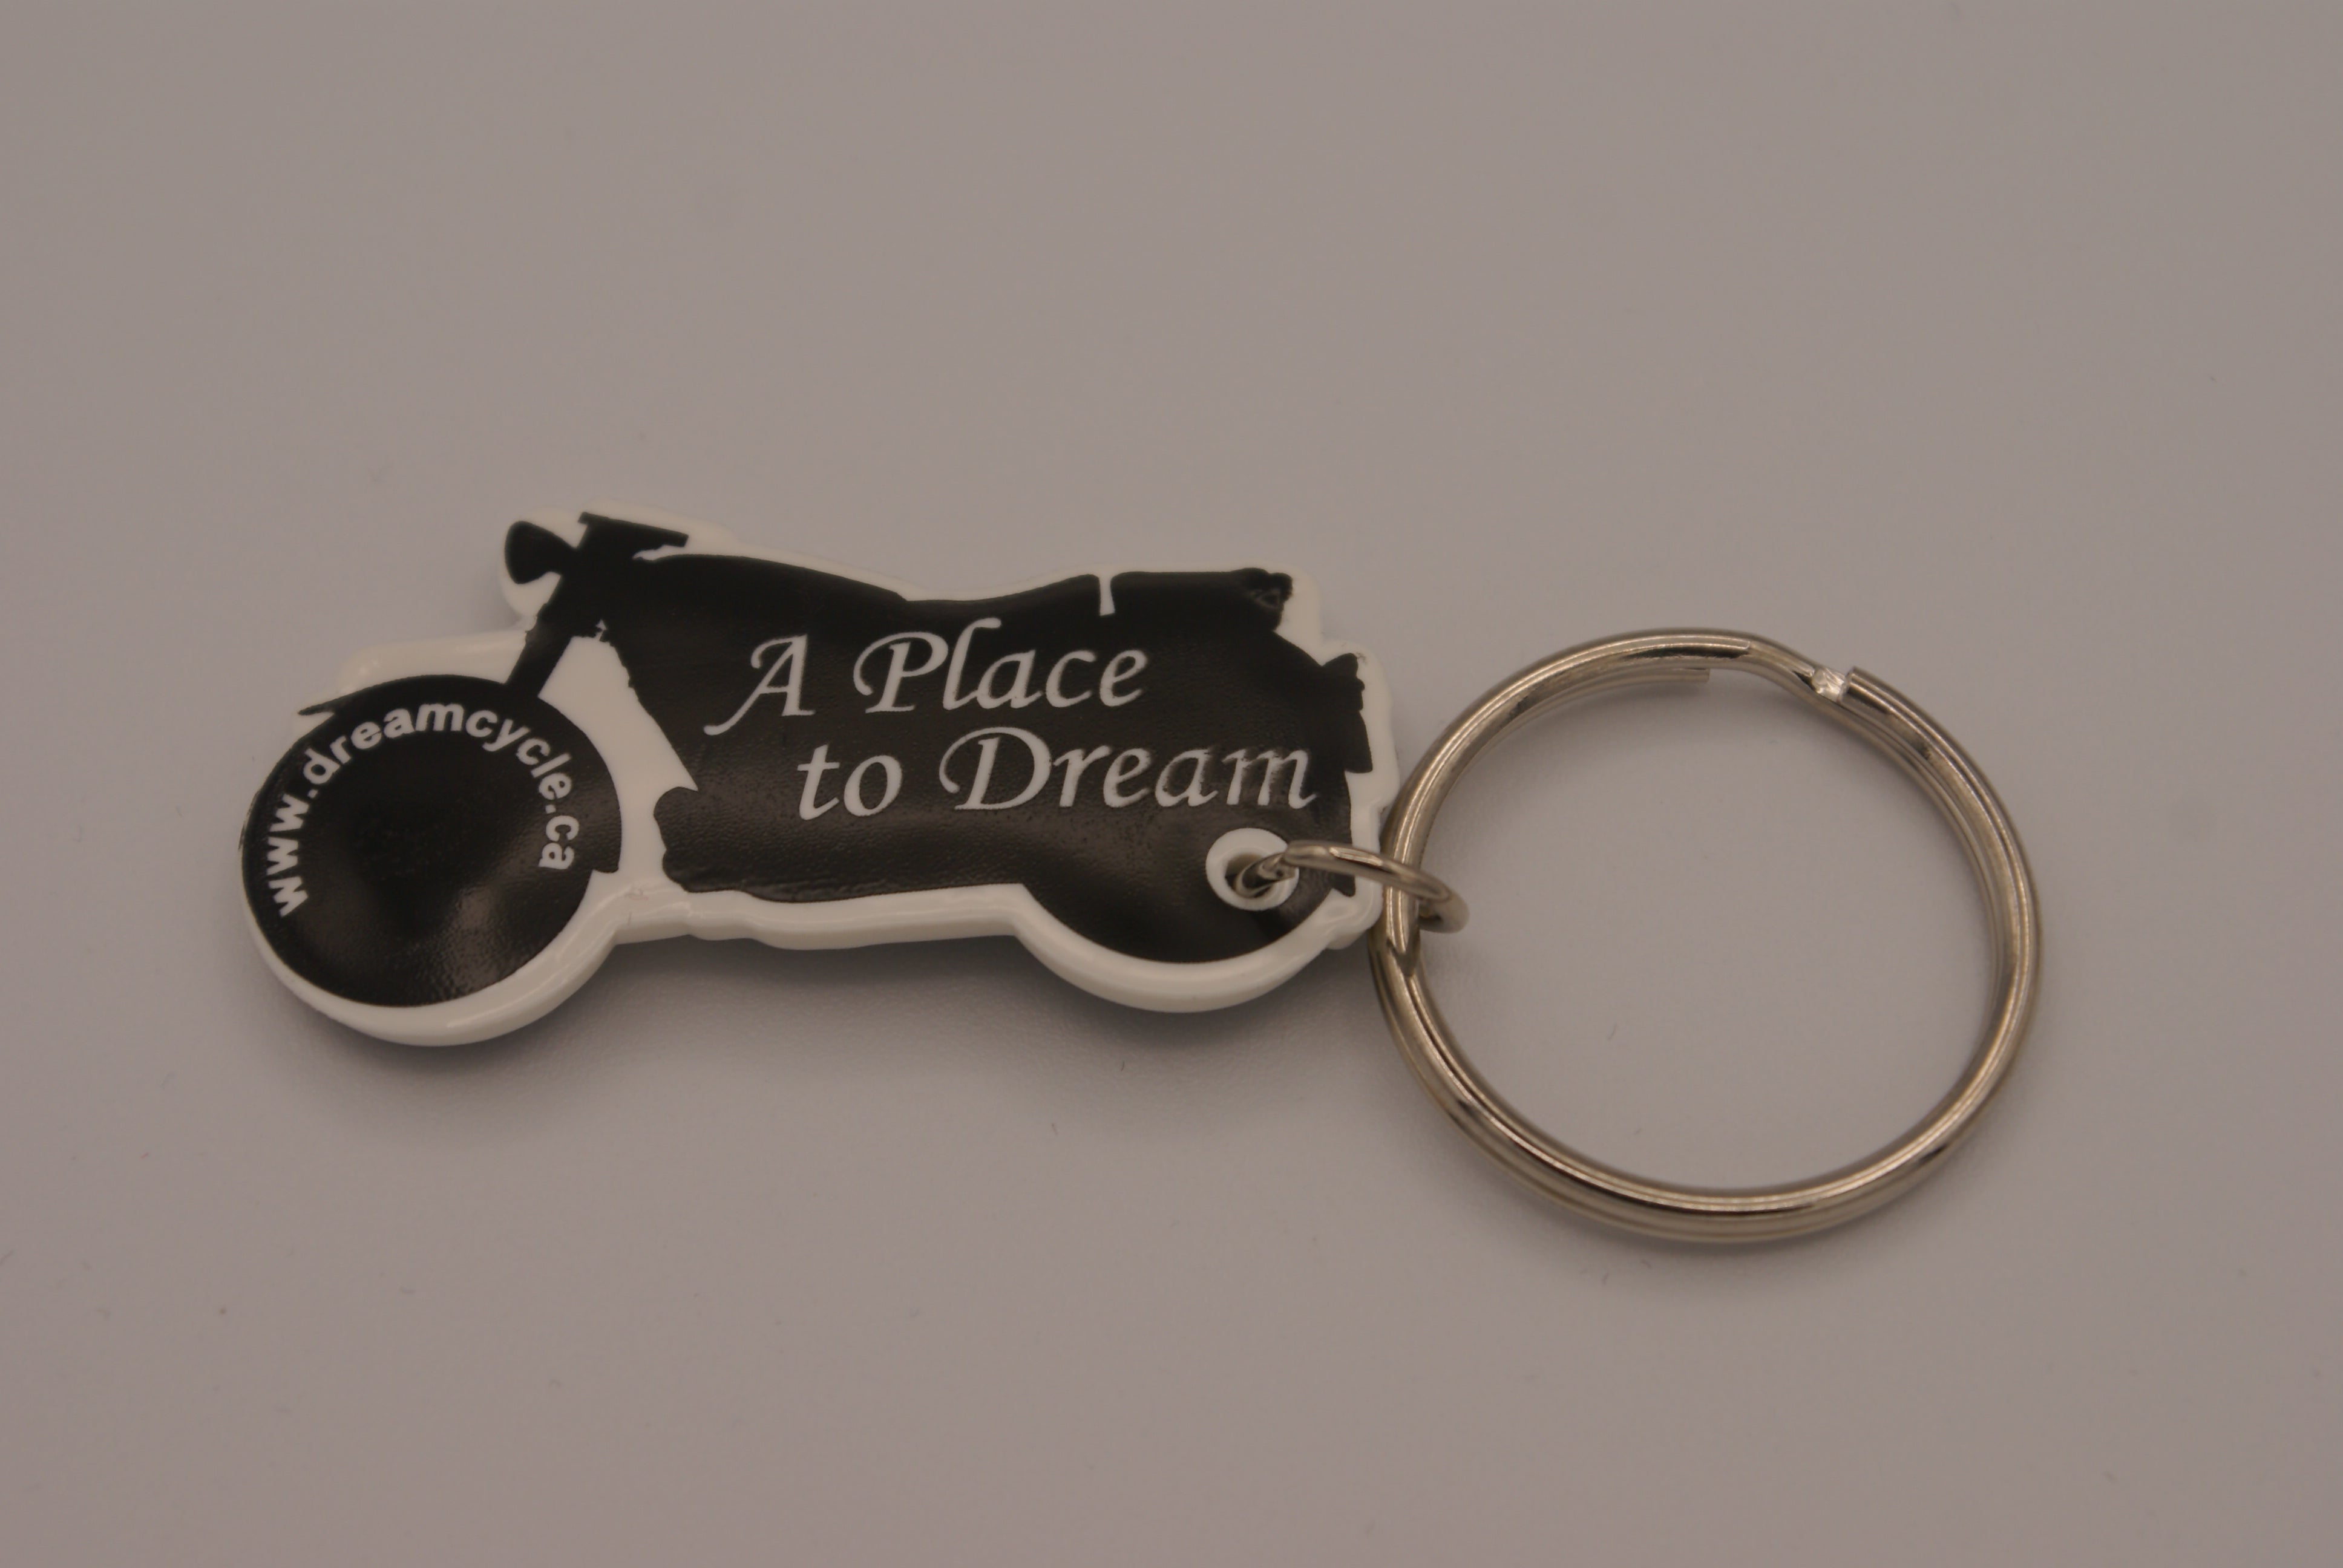 Dreamcycle Key Chain